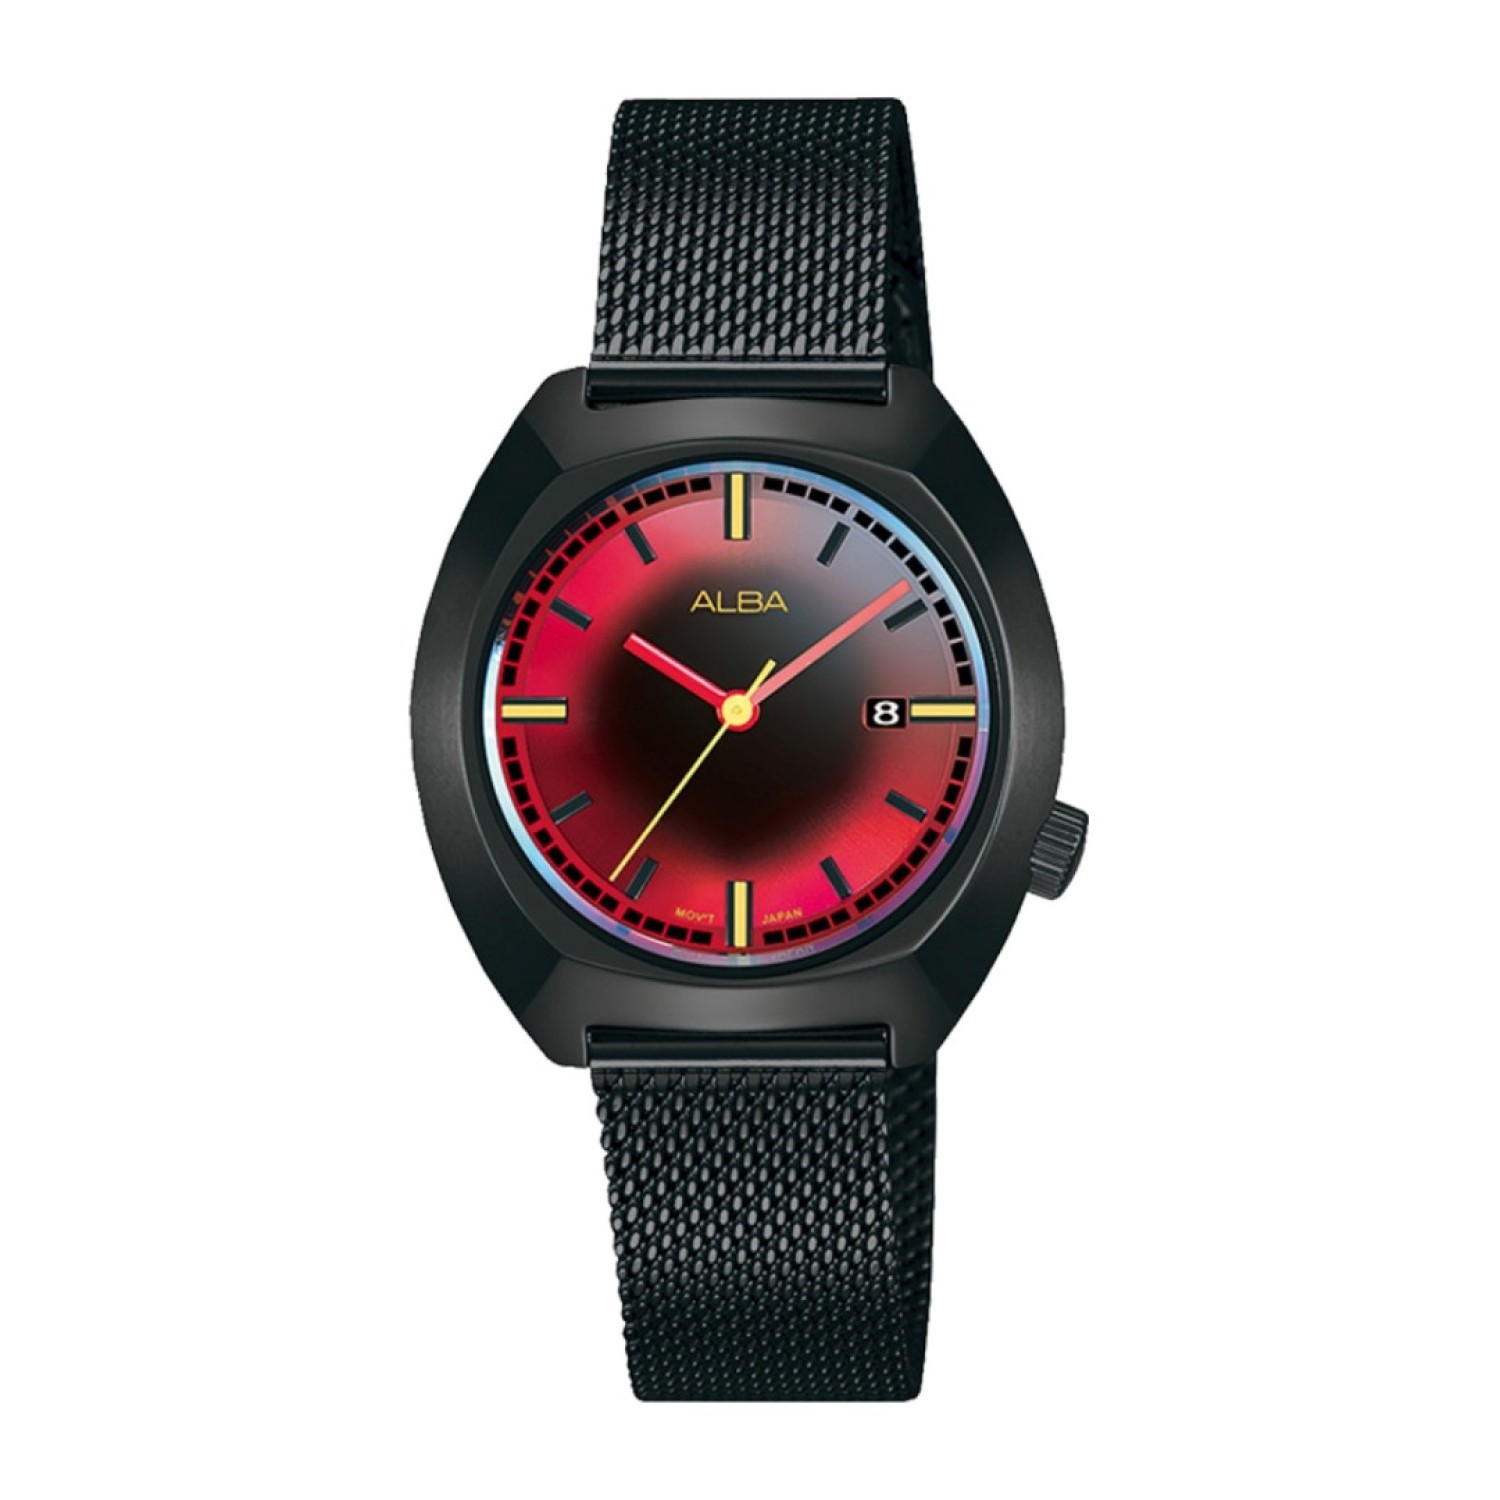 AH7Y45X1 Tokyo Neon fashion watch. AH7Y45X1  ALBA Tokyo Neon is inspired from Tokyo street fashion, the theme colour “NEON” is the hottest trend.